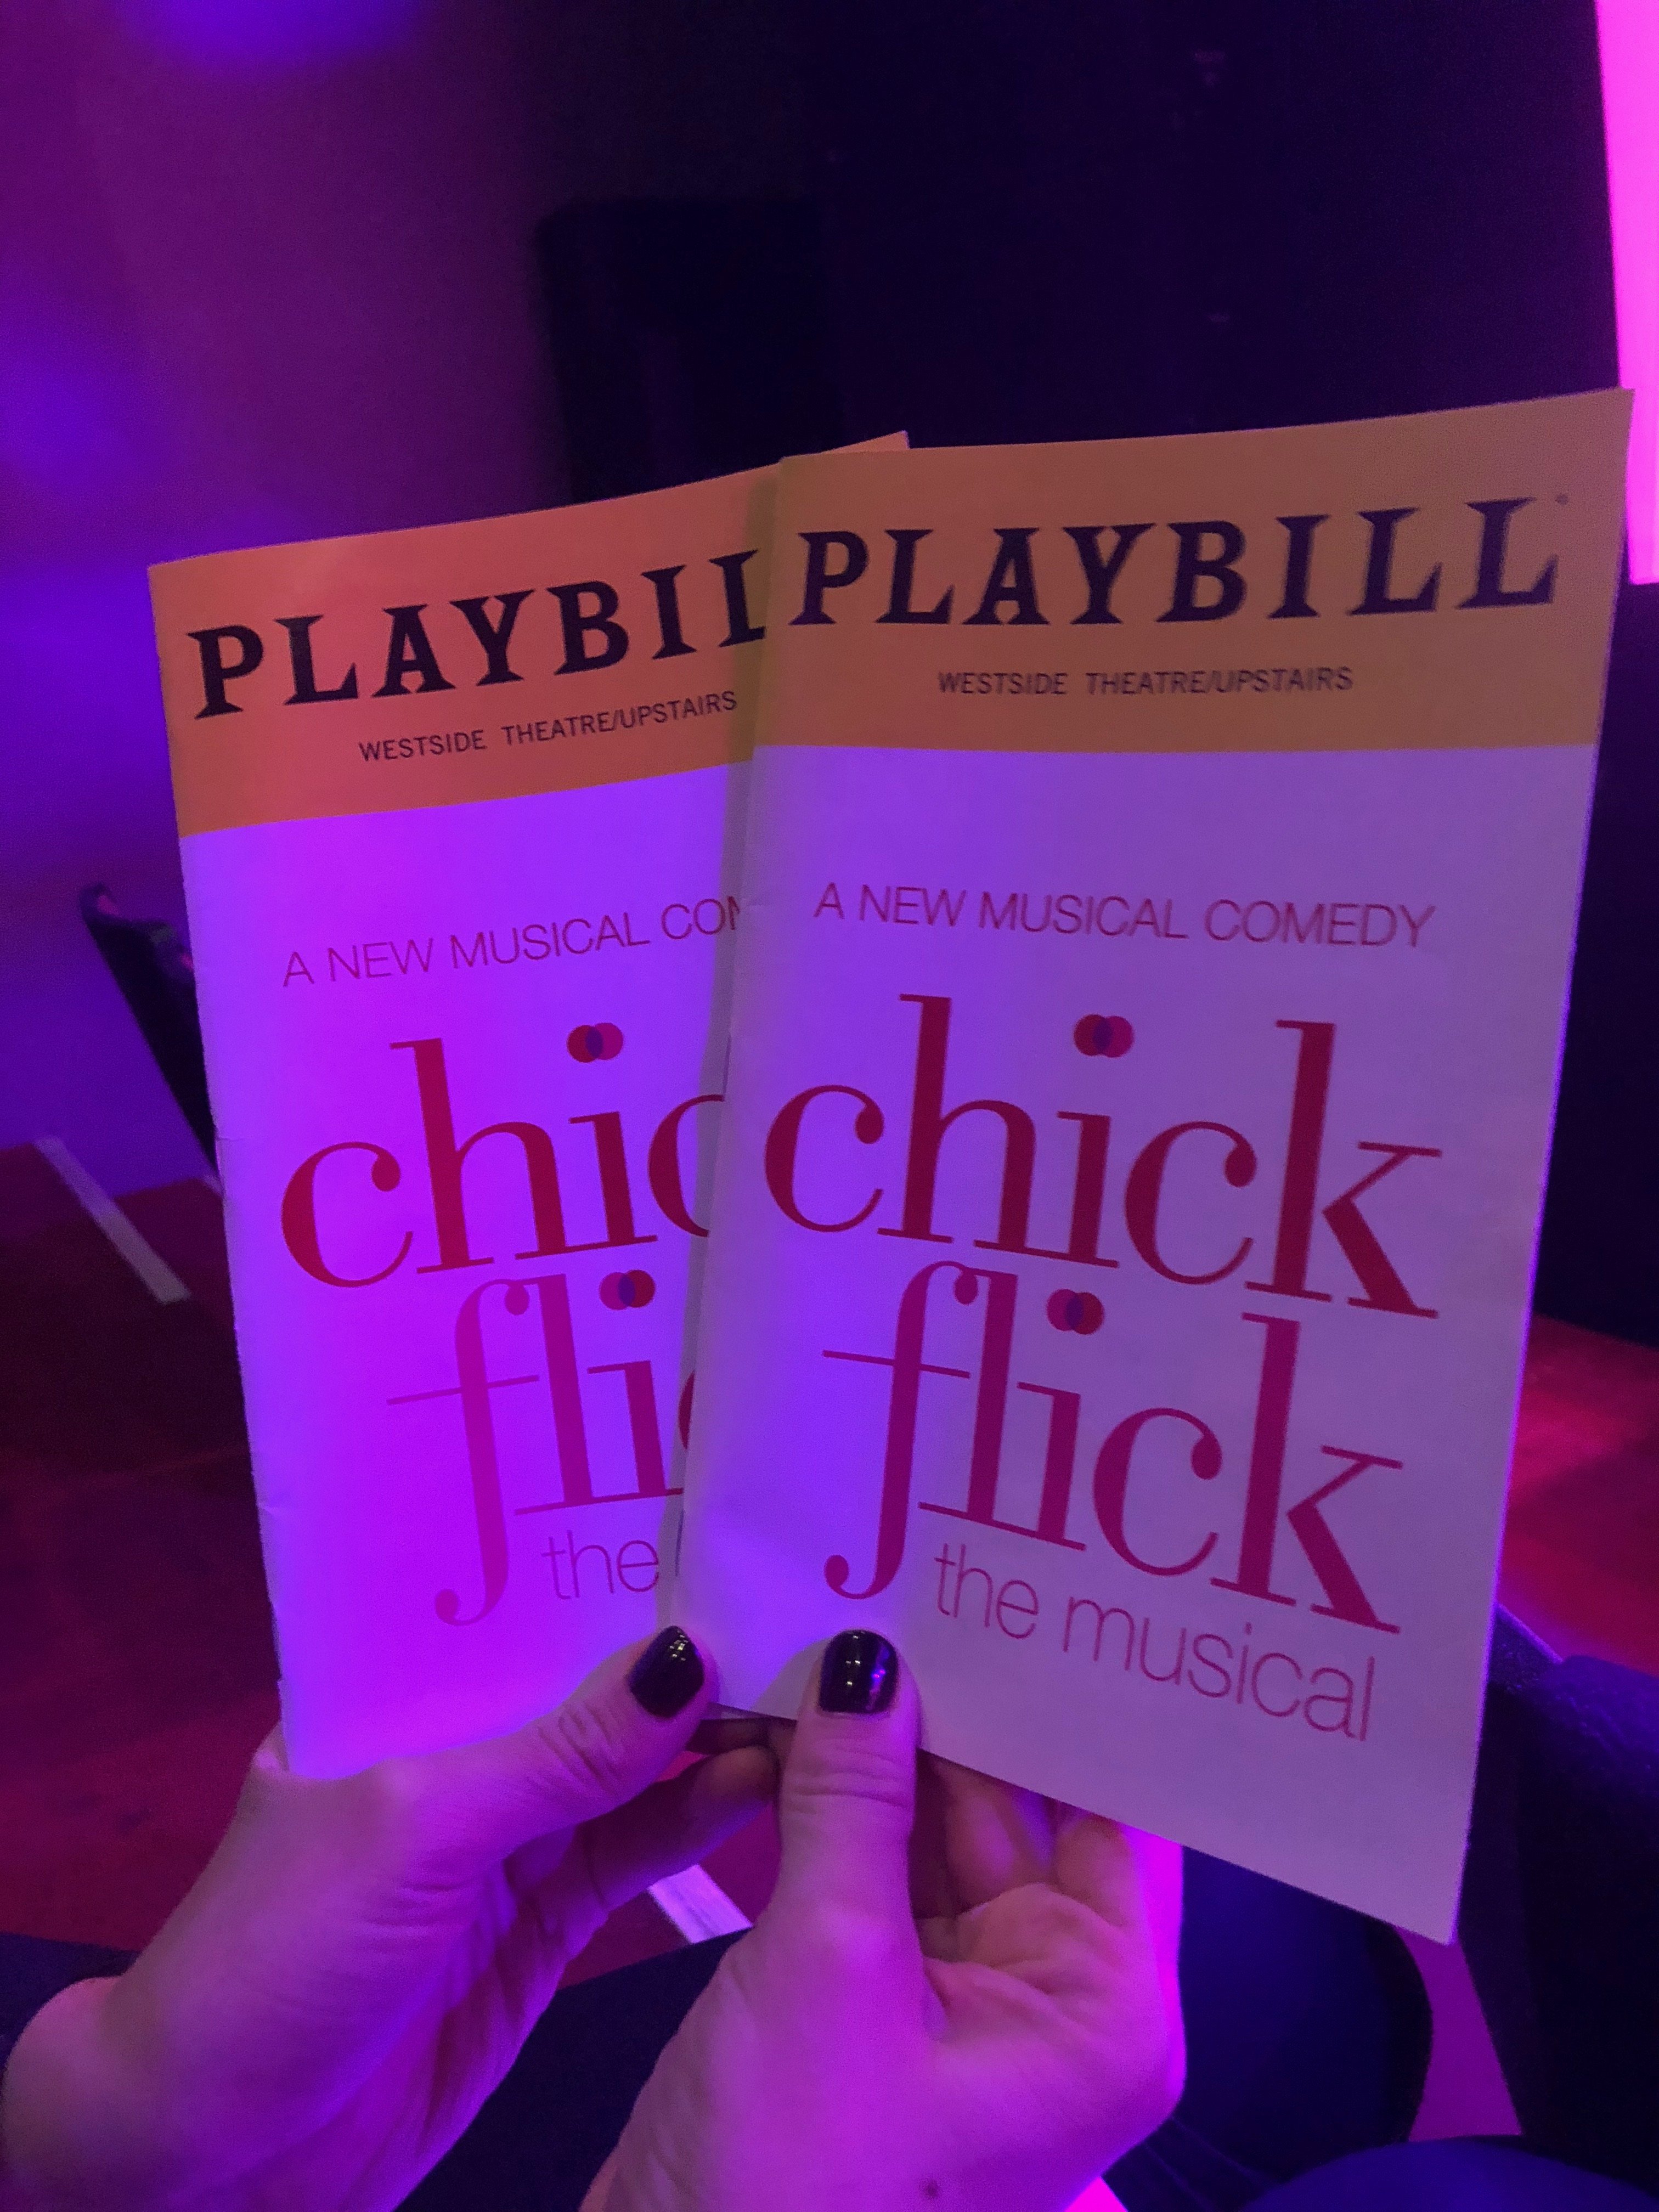 chick flick musical, chick flicks, romantic comedies, off broadway musicals